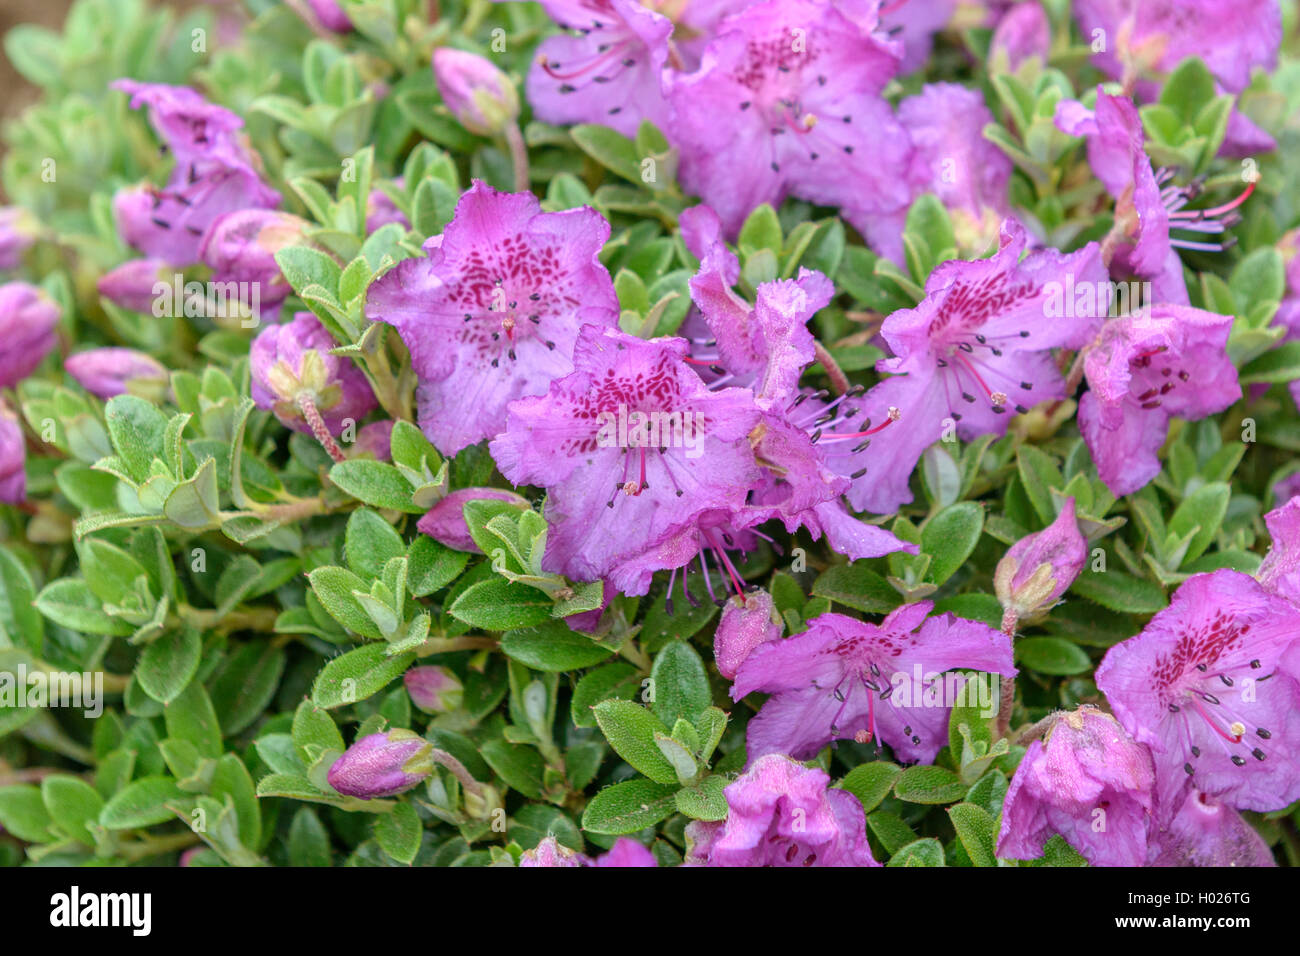 Rhododendron (Rhododendron calostrotum subsp keleticum), blooming Stock Photo